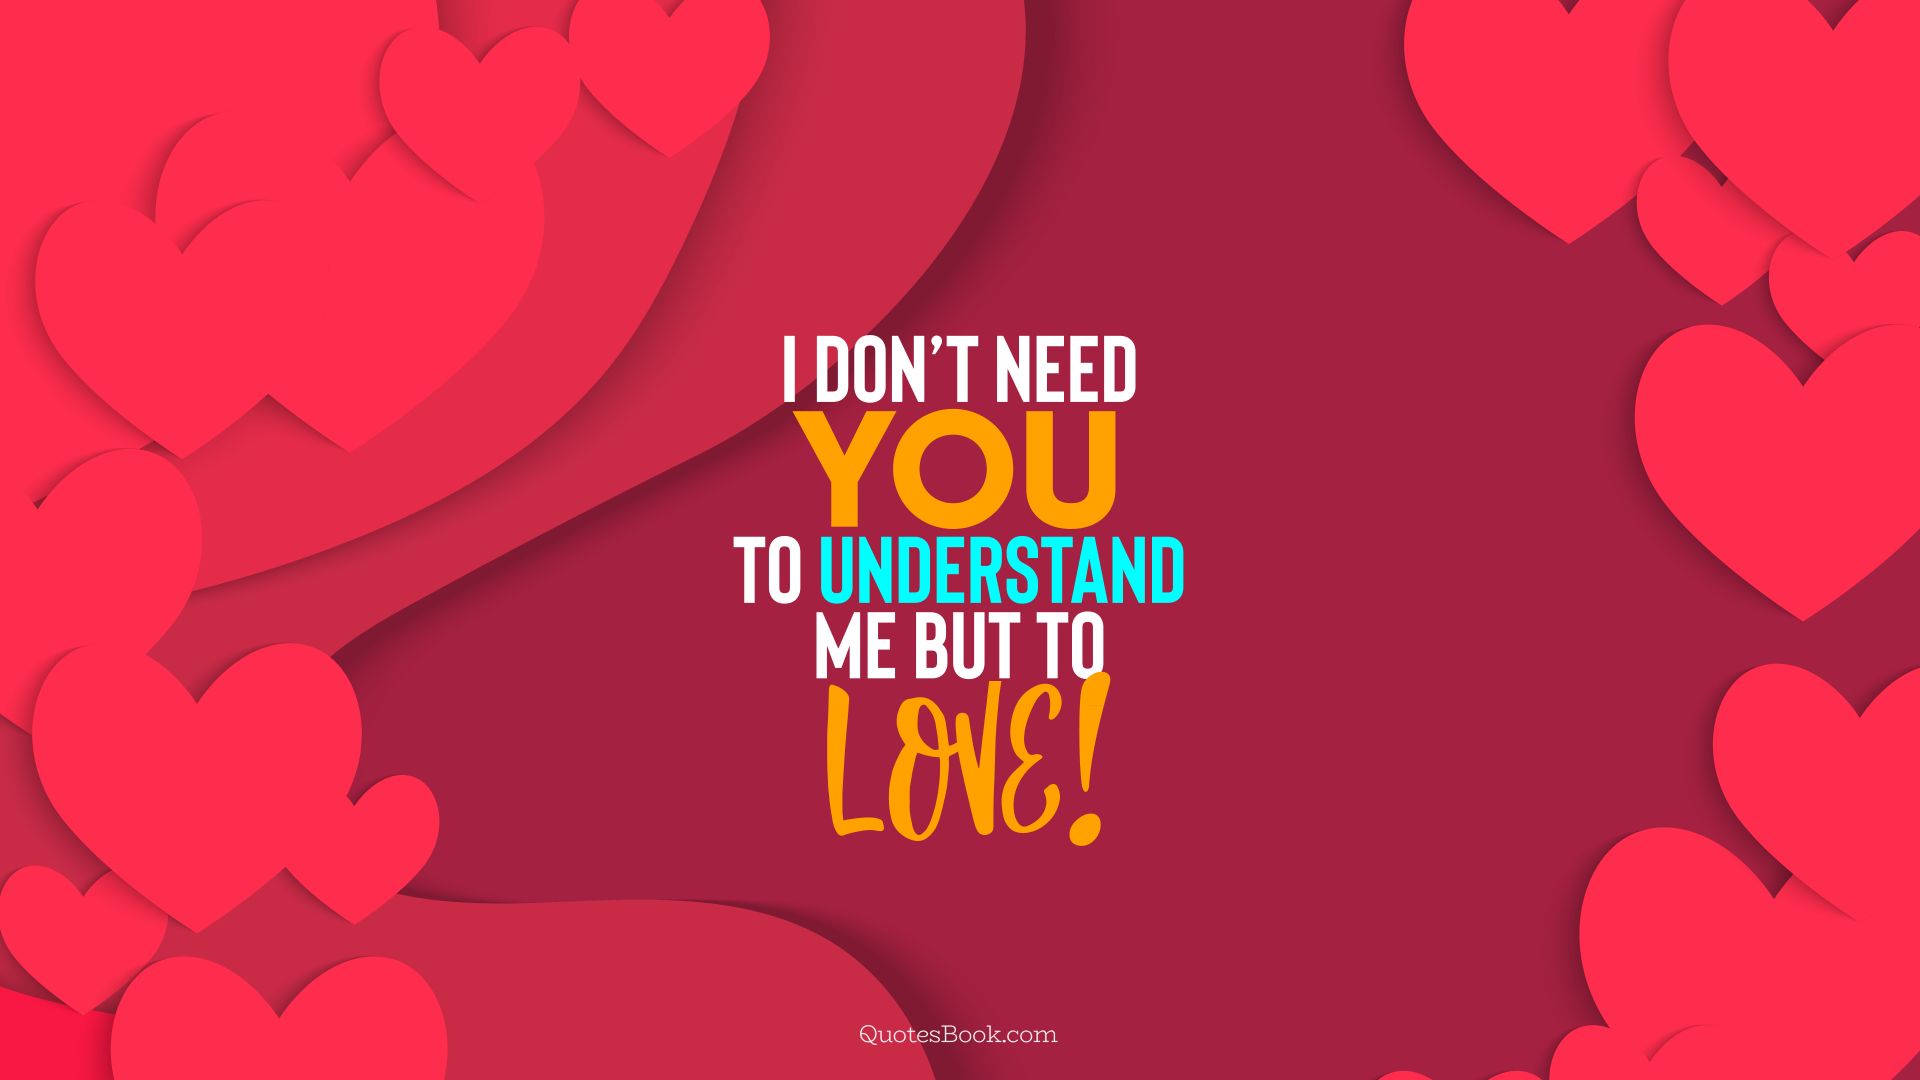 I don’t need you to understand me but to love!. - Quote by QuotesBook